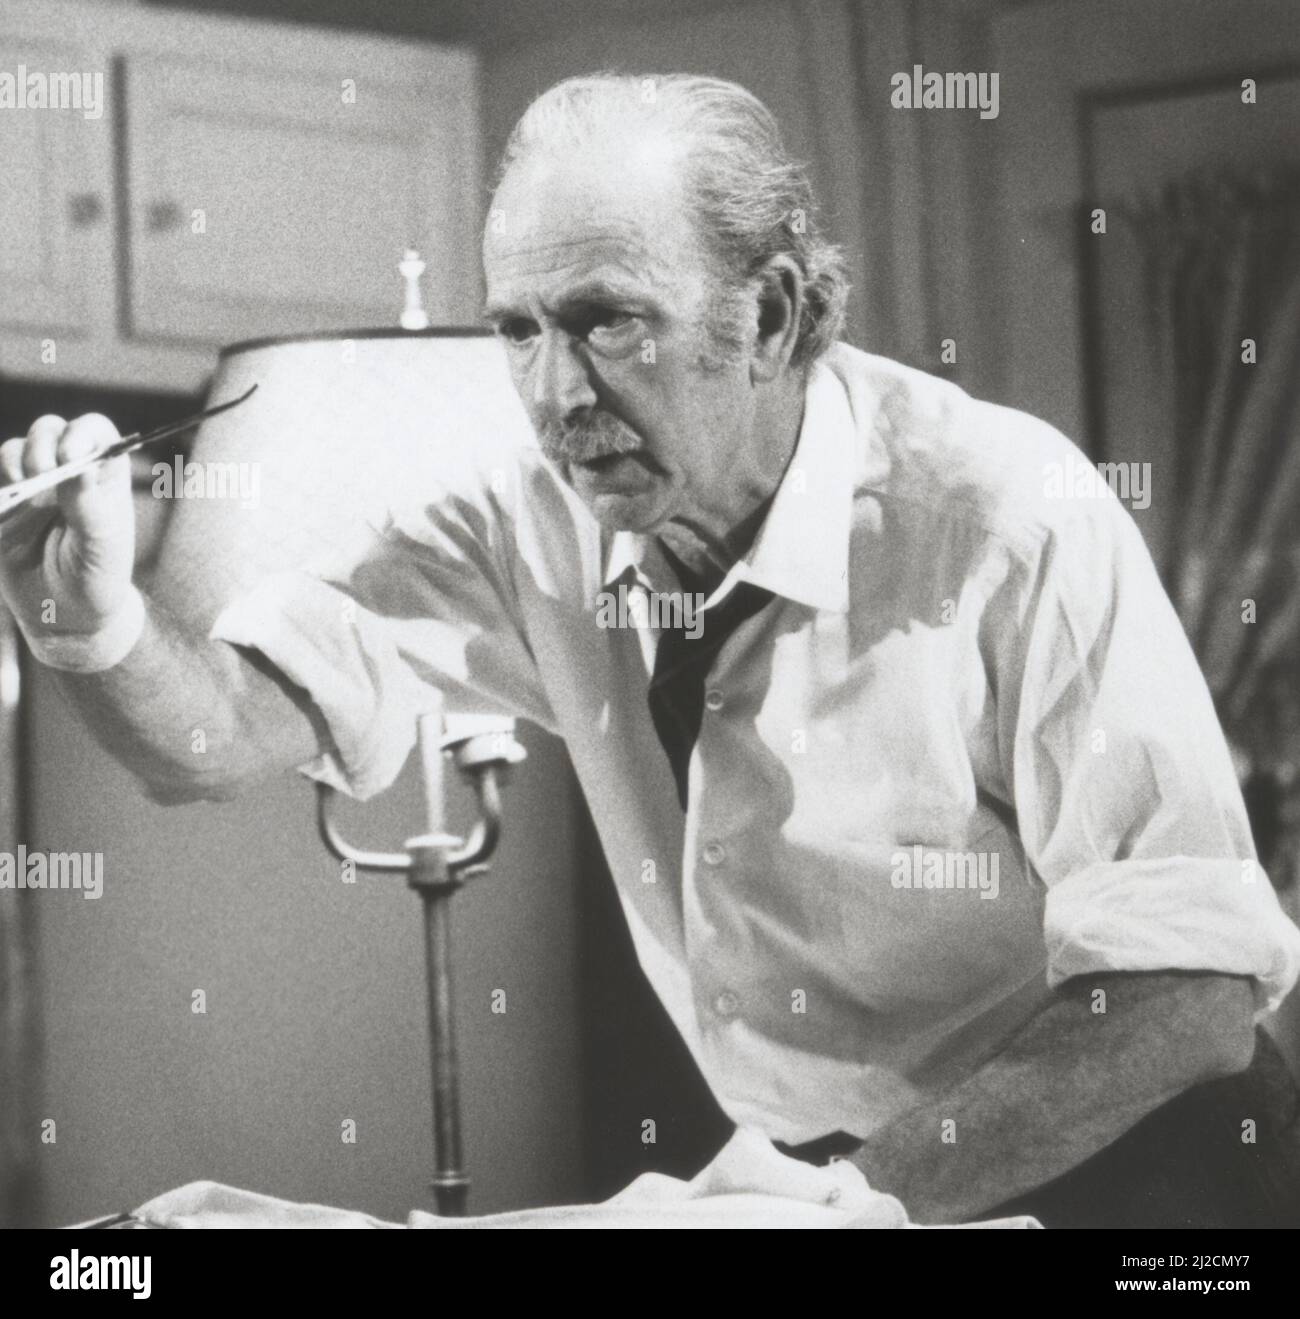 Publicity photograph taken on the production set of The Sad and Lonely Sundays, a second unsold pilot of the abandoned medical drama television project The Oath.  Pictured here is Jack Albertson ca. 1976 Stock Photo